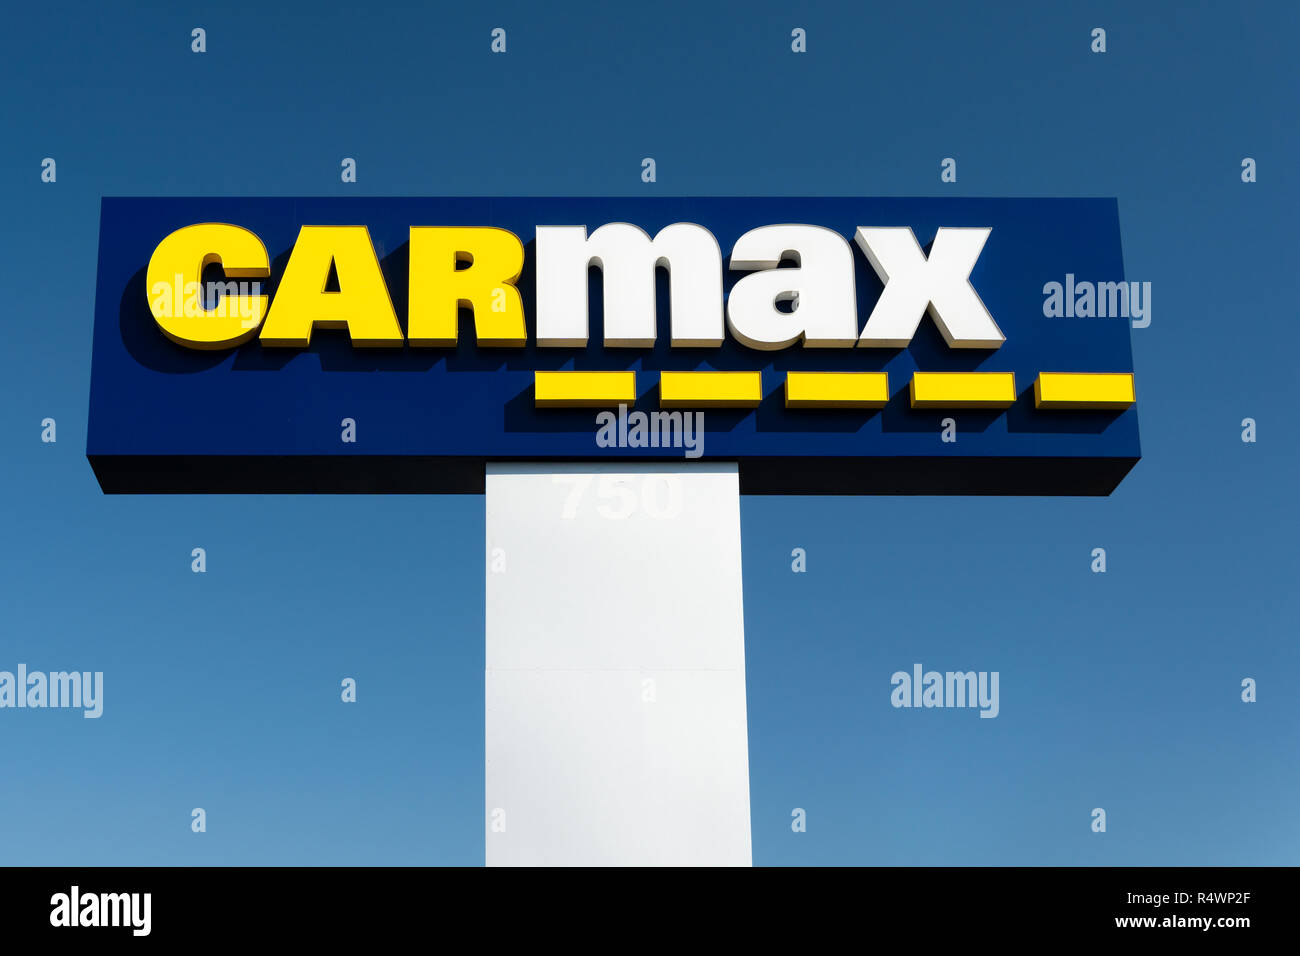 SAN JOSE, CA/USA - OCTOBER 20, 2018: Carmax dealership sign and logo. CarMax is the United States' largest used-car retailer and a Fortune 500 company Stock Photo